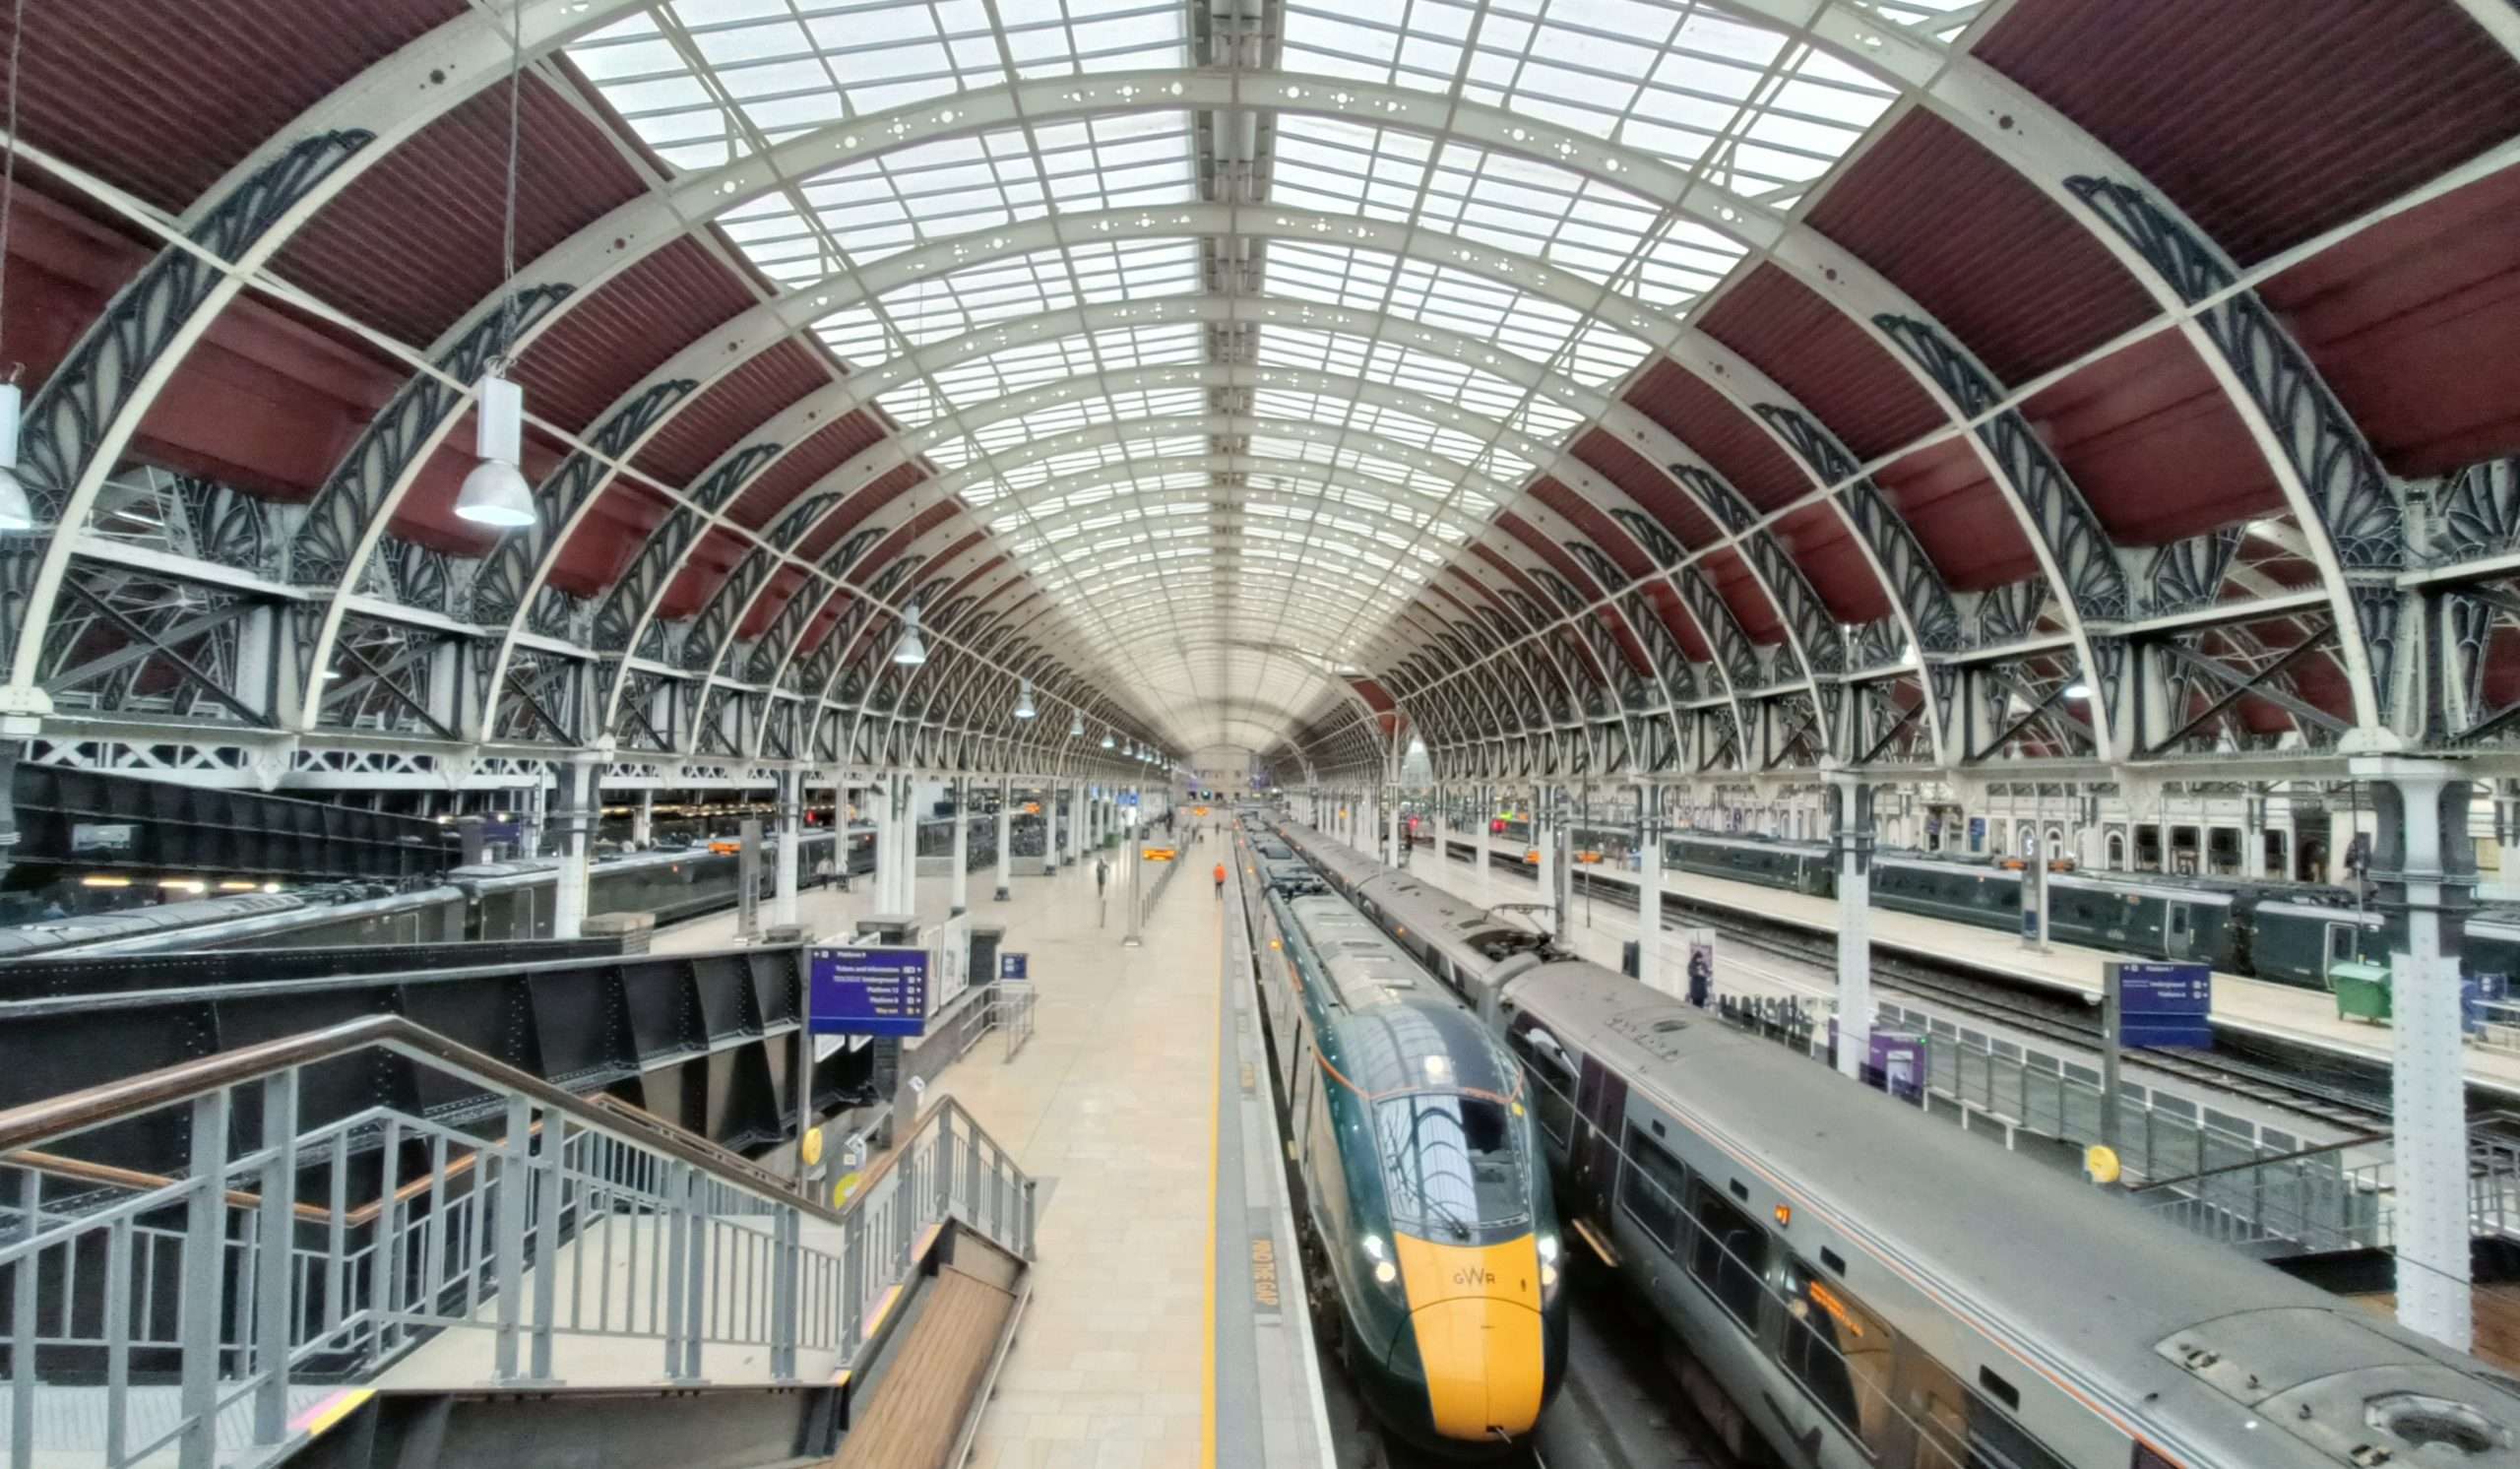 Long distance train journeys will not operate due to strike action this weekend